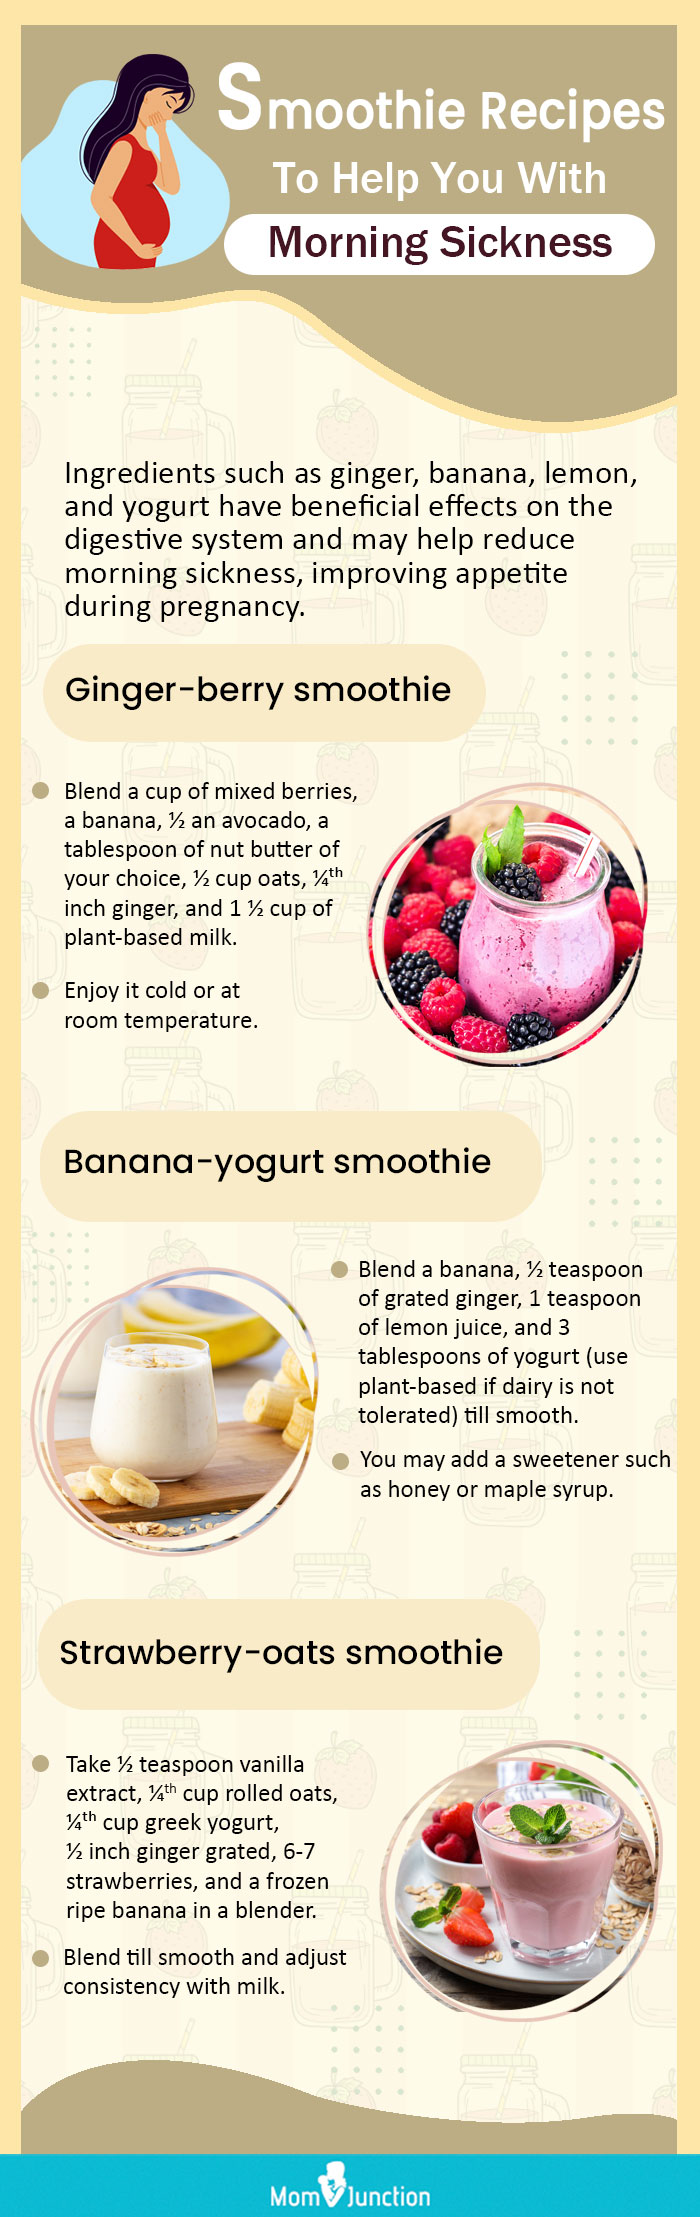 pregnancy smoothies to cope with morning sickness (infographic)